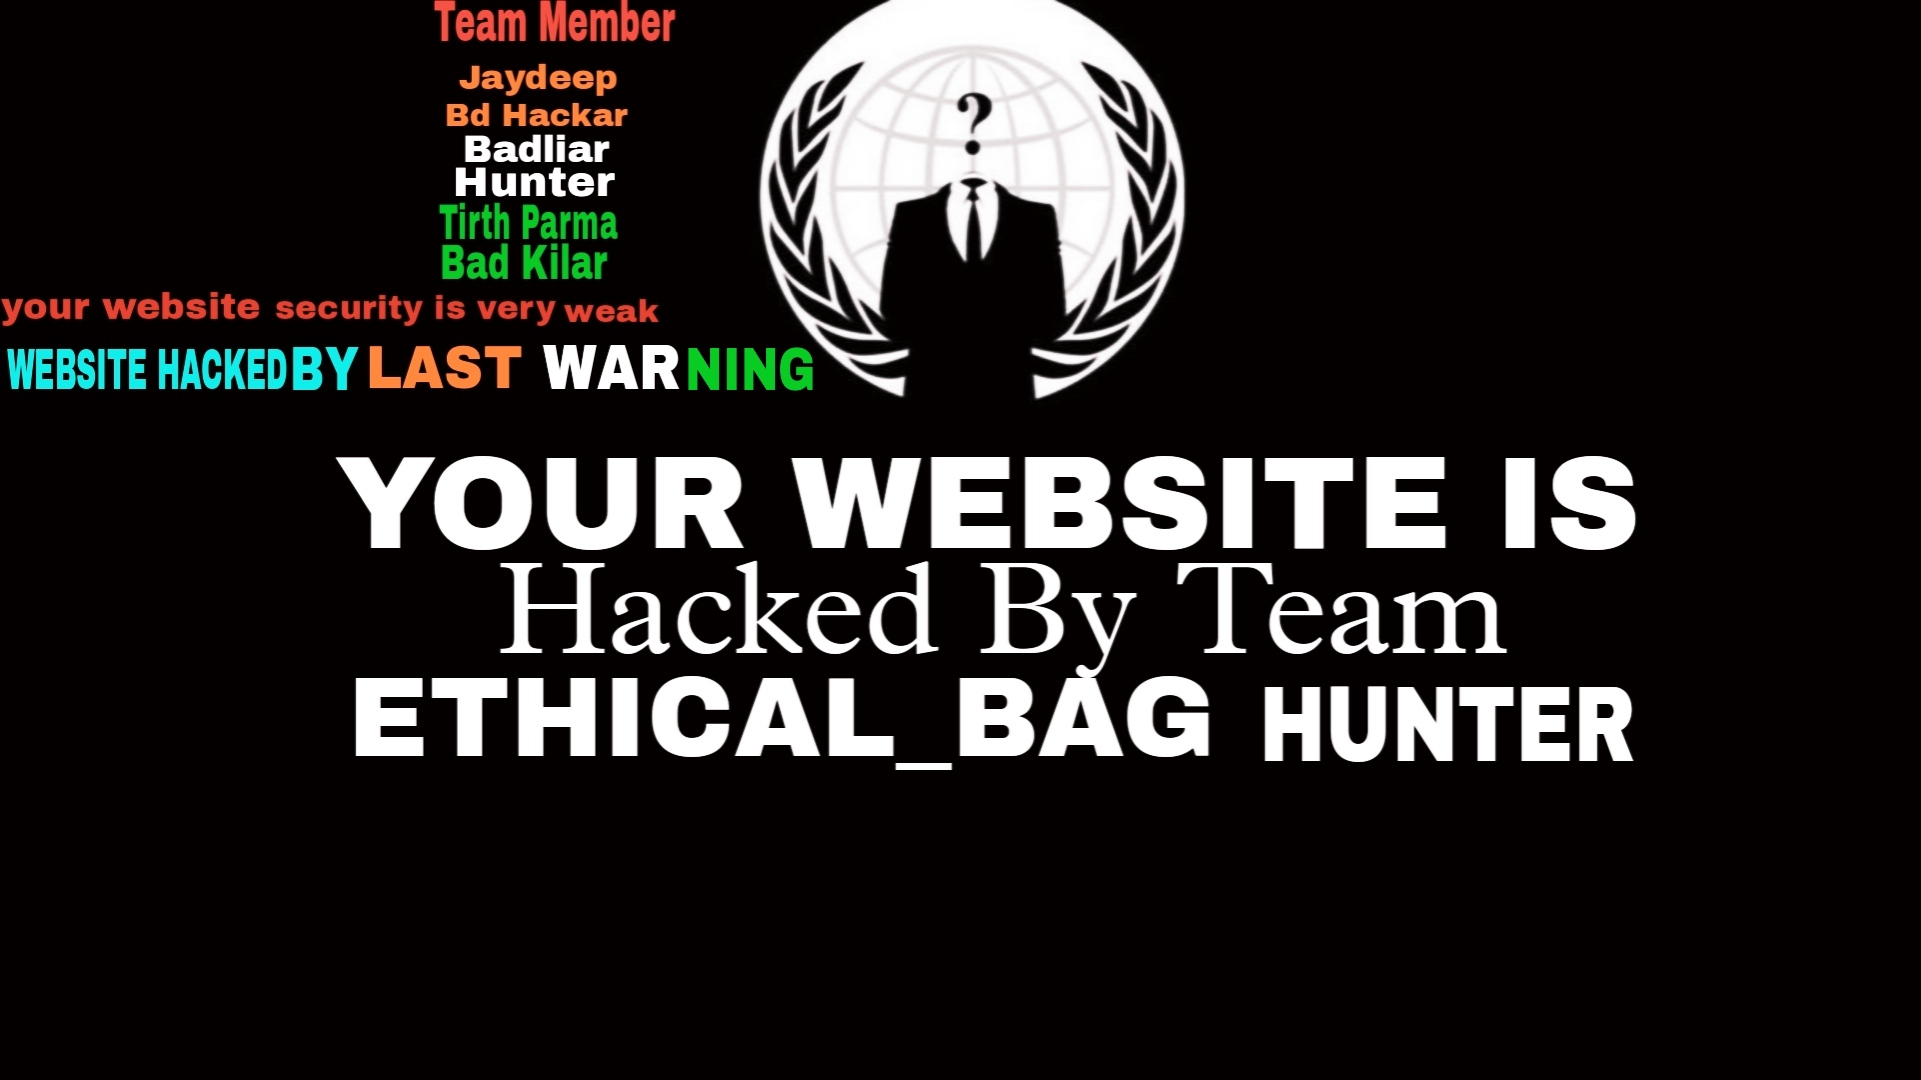 THIS WEBSITE HACKED BY TEAM _ETHICAL_BAG_HUNTER